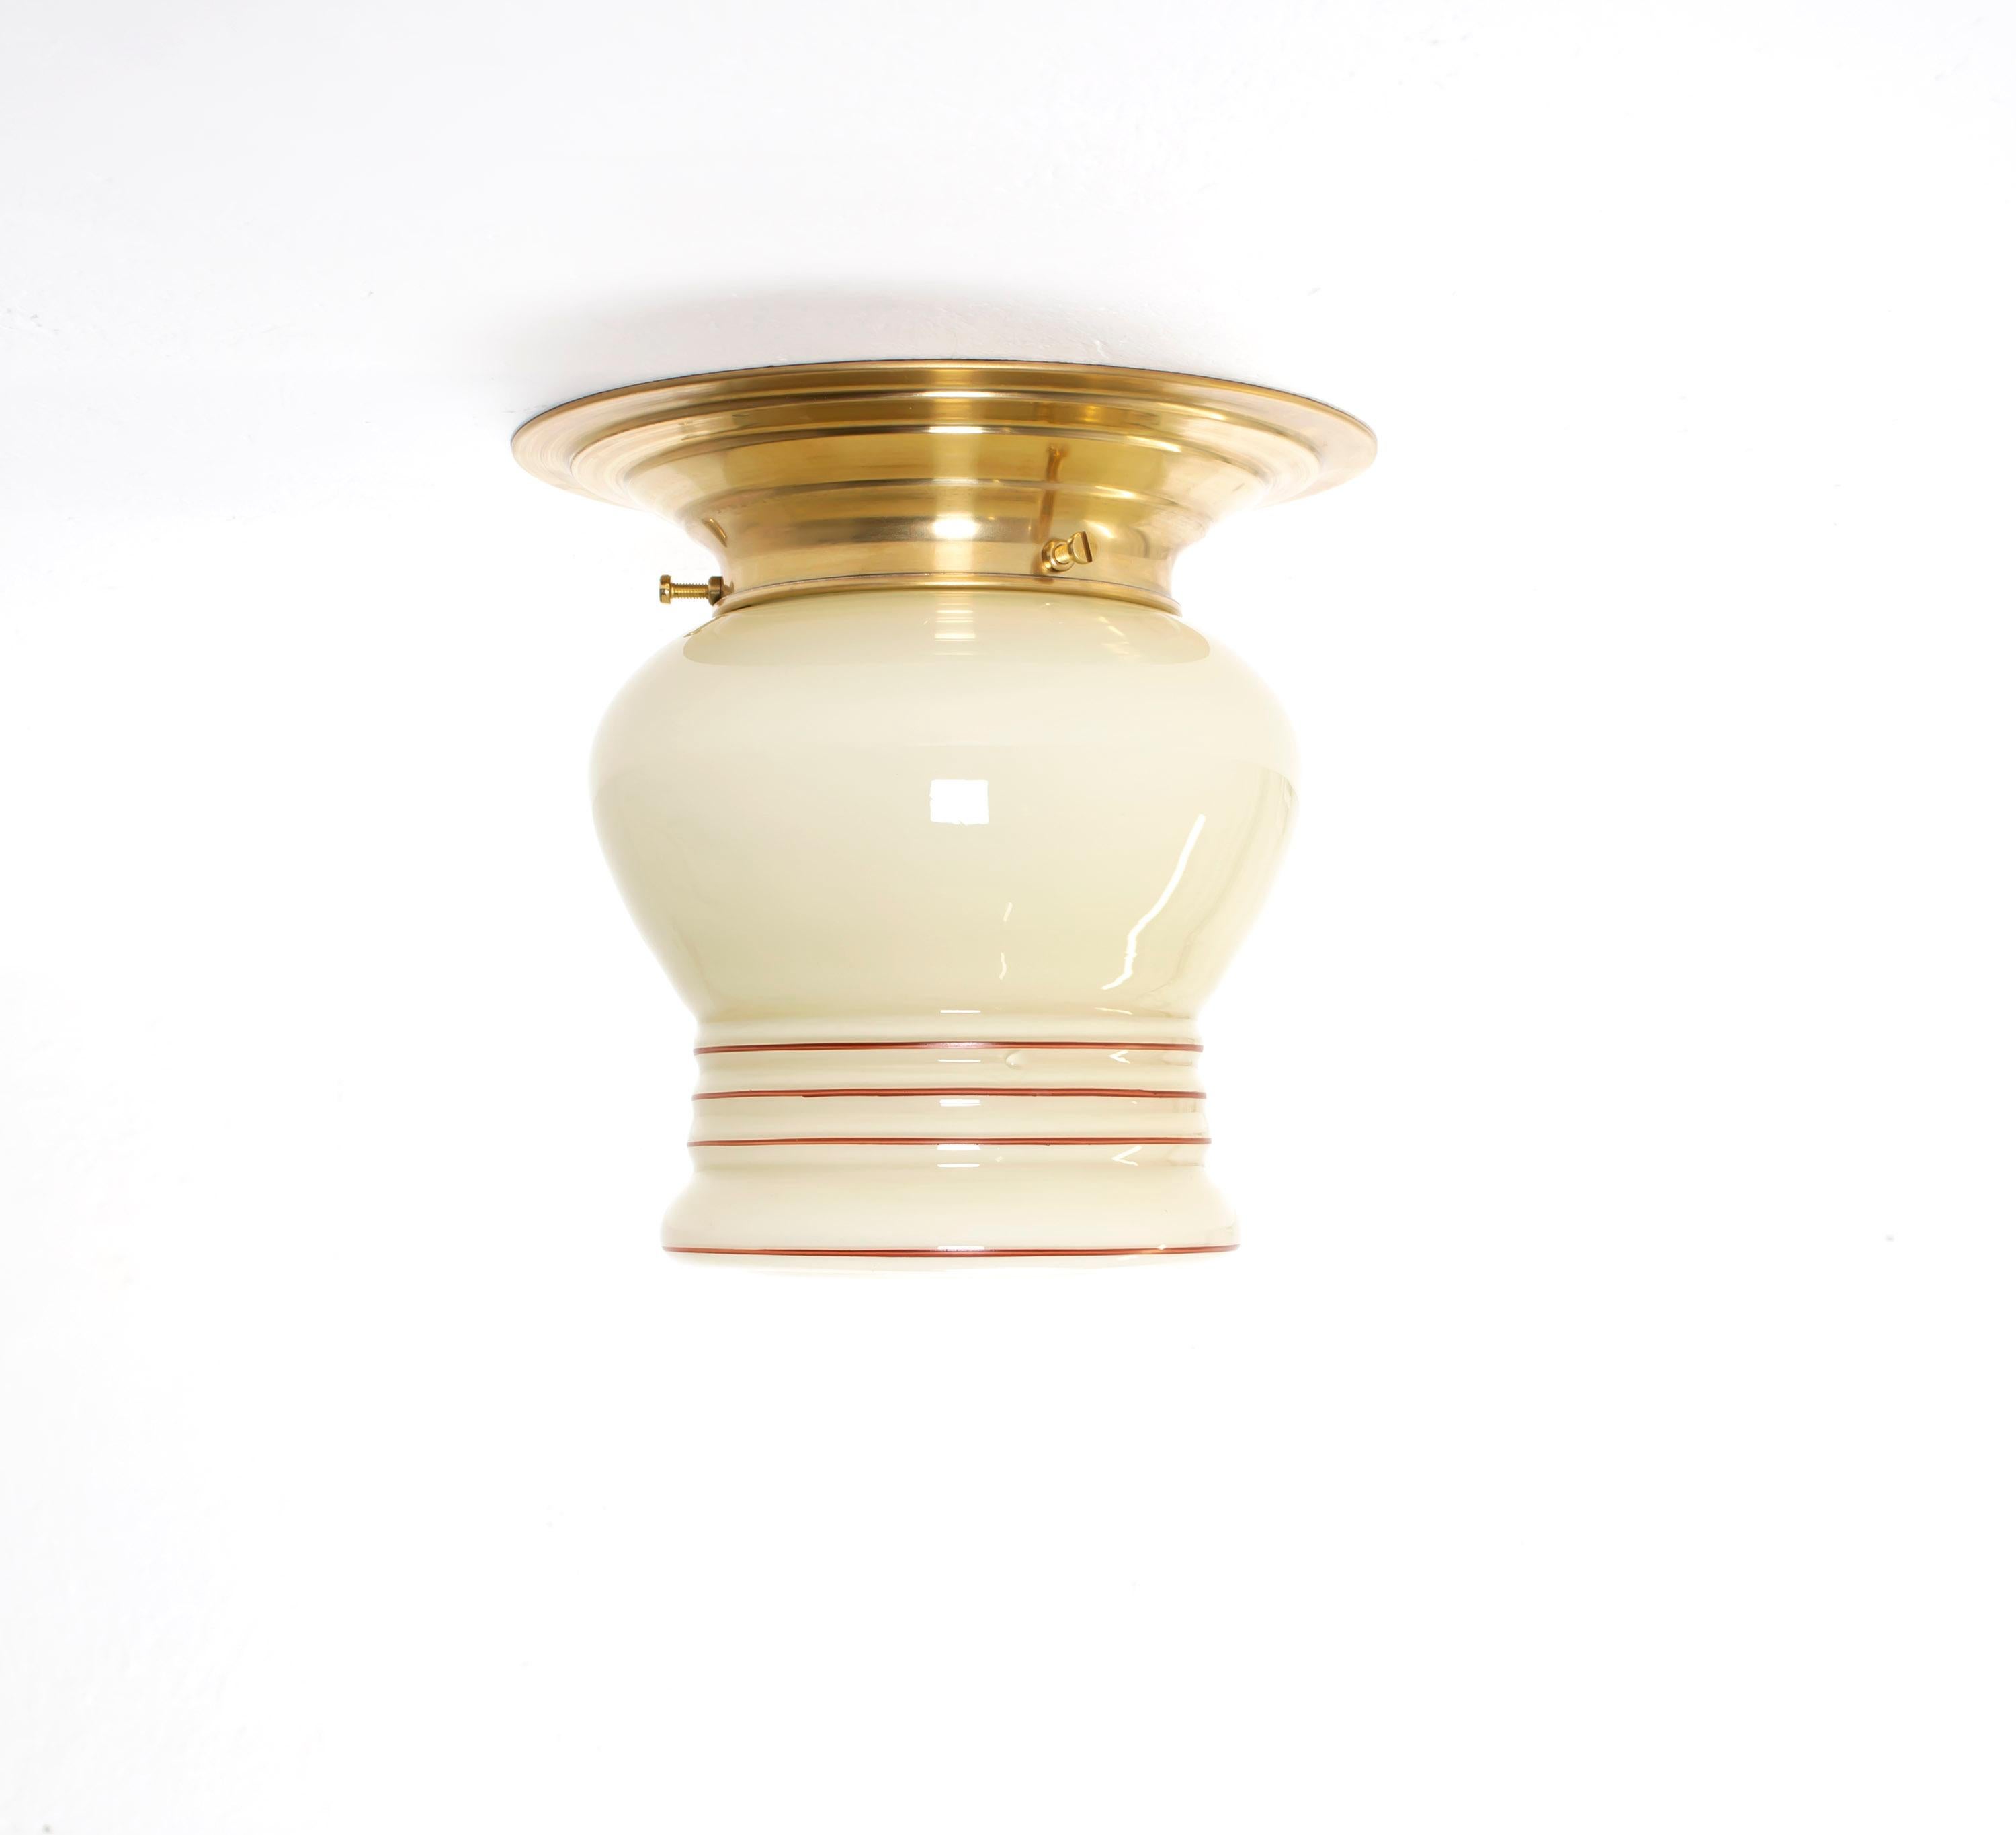 Wonderful, decorative and rare ceiling light in opaline glass with brass metal base. Designed and made in Norway from ca 1950s first half. The lamp is fully working and in very good vintage condition. It is fitted with one E27 bulb holder (works in